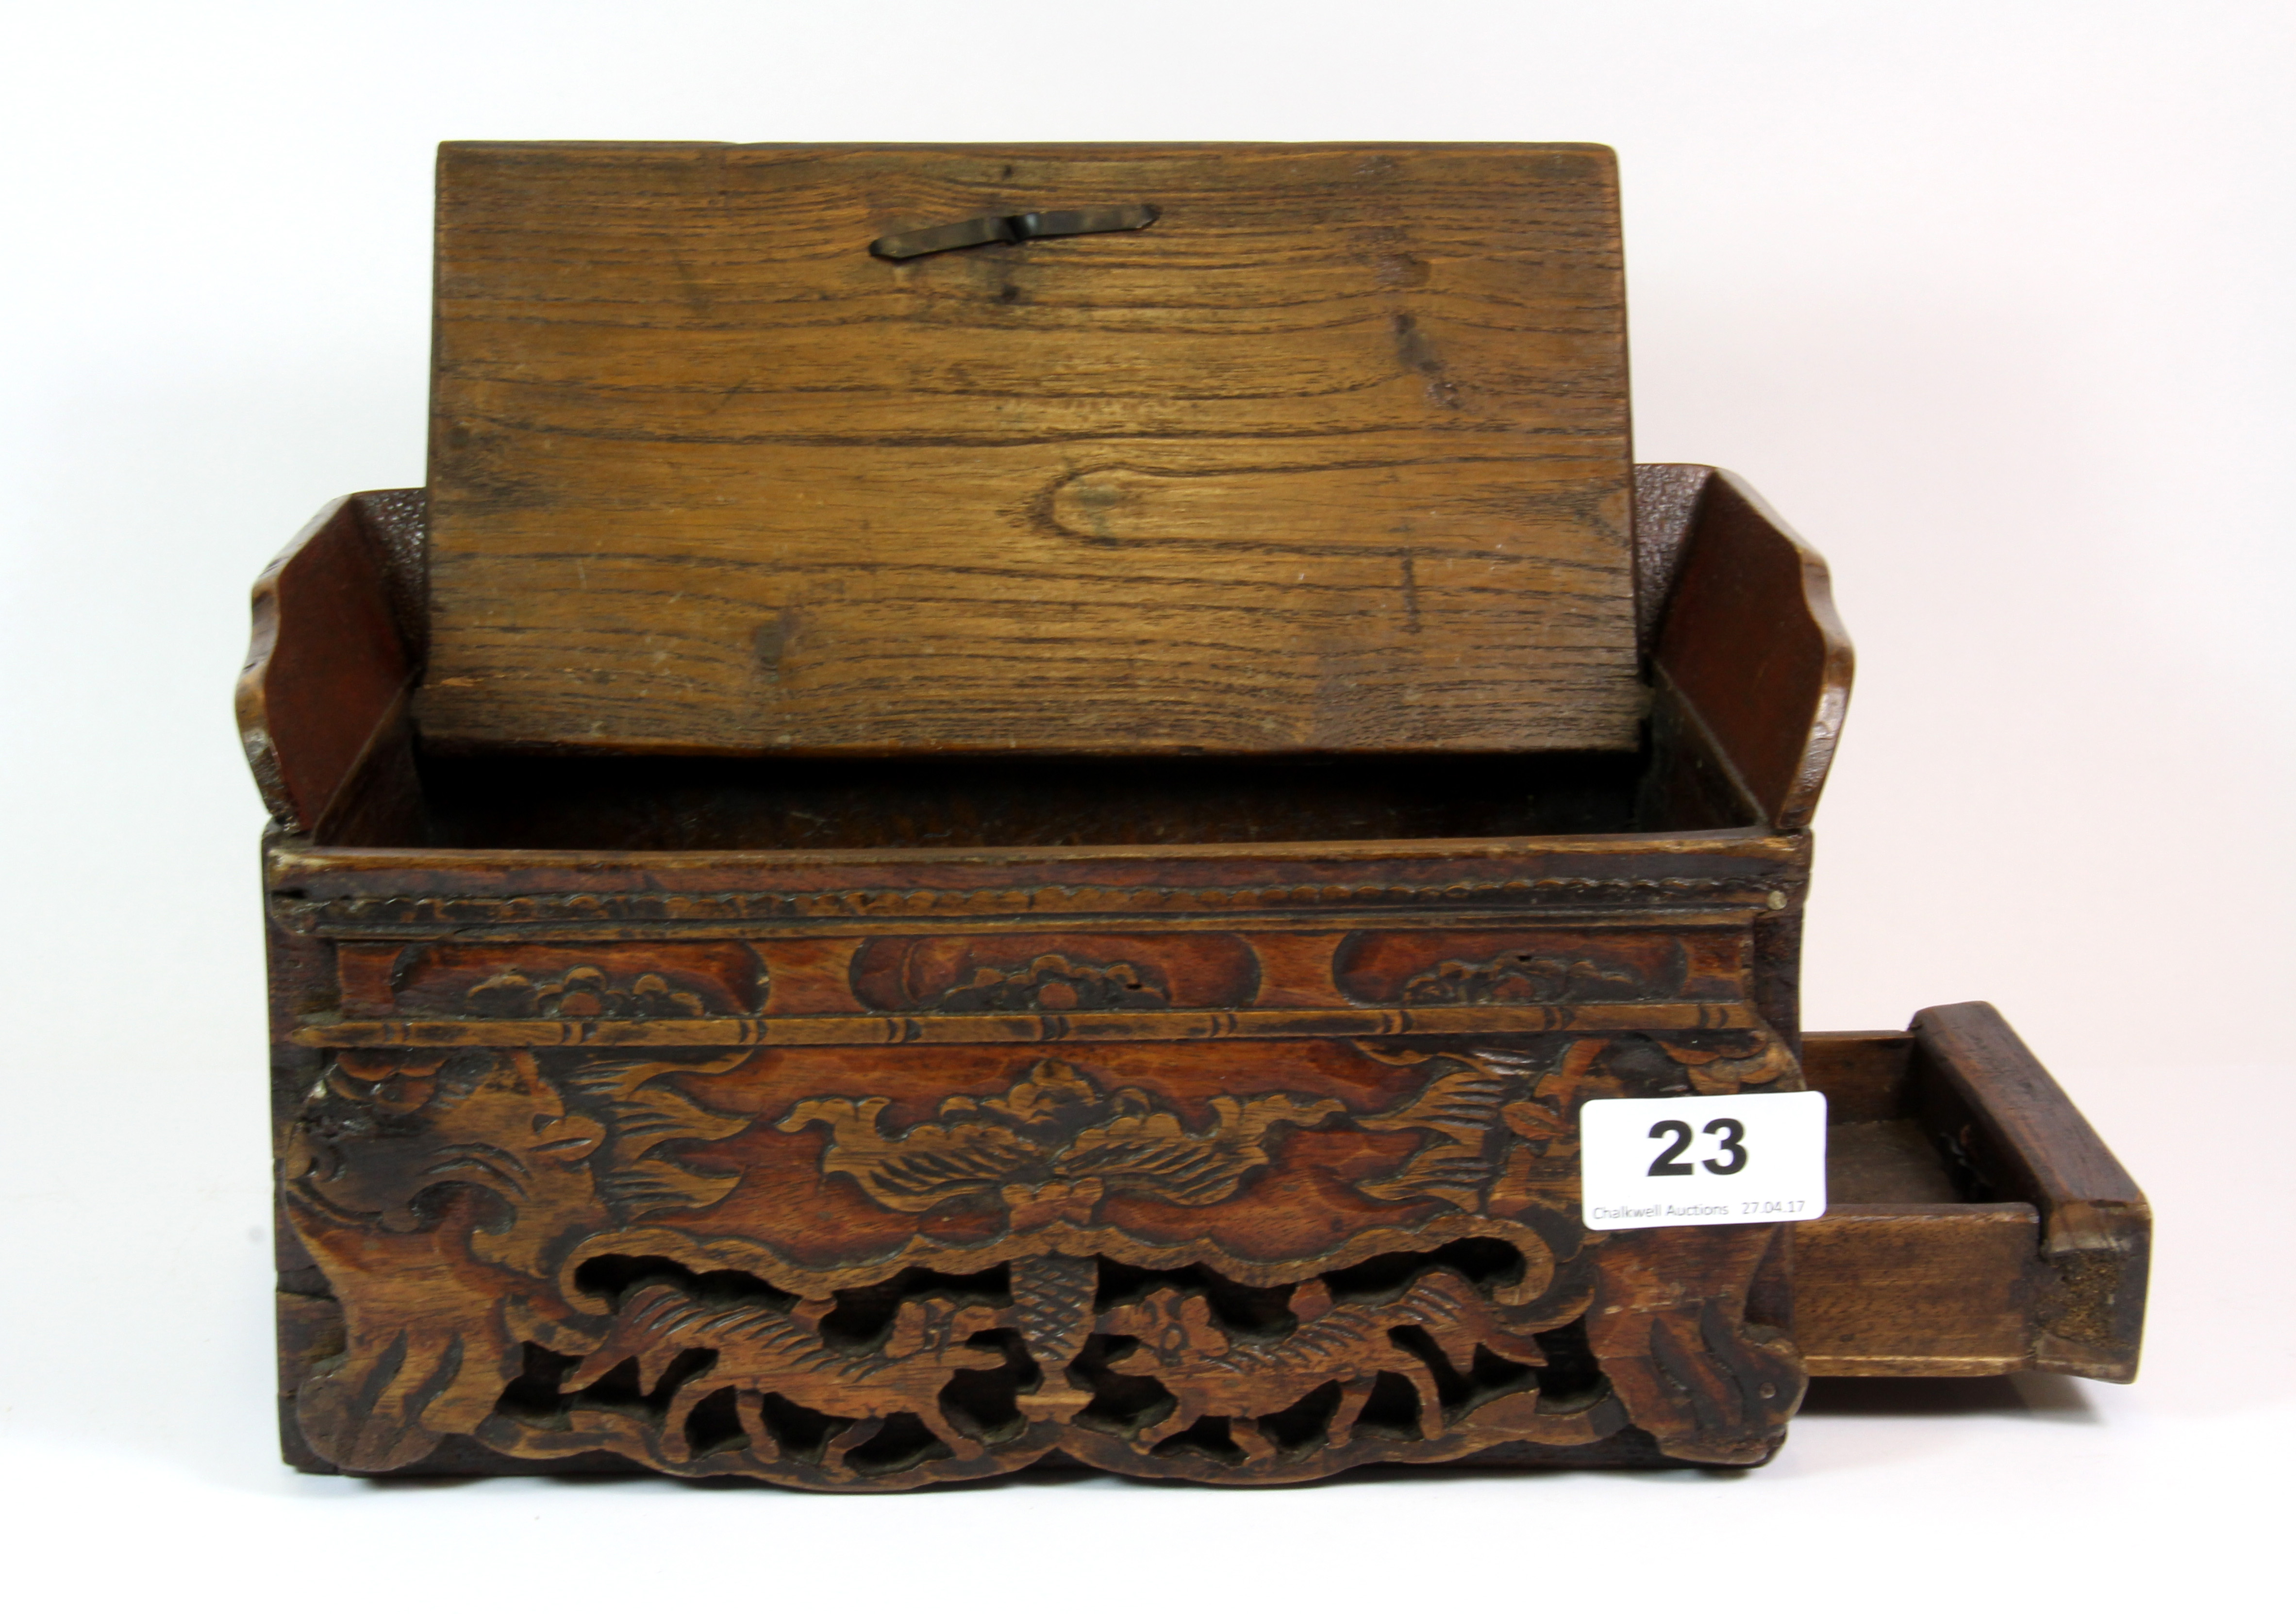 A 19th century Chinese carved wooden desk stand in the form of a throne, 25cm x 15cm x 15cm. - Image 2 of 2